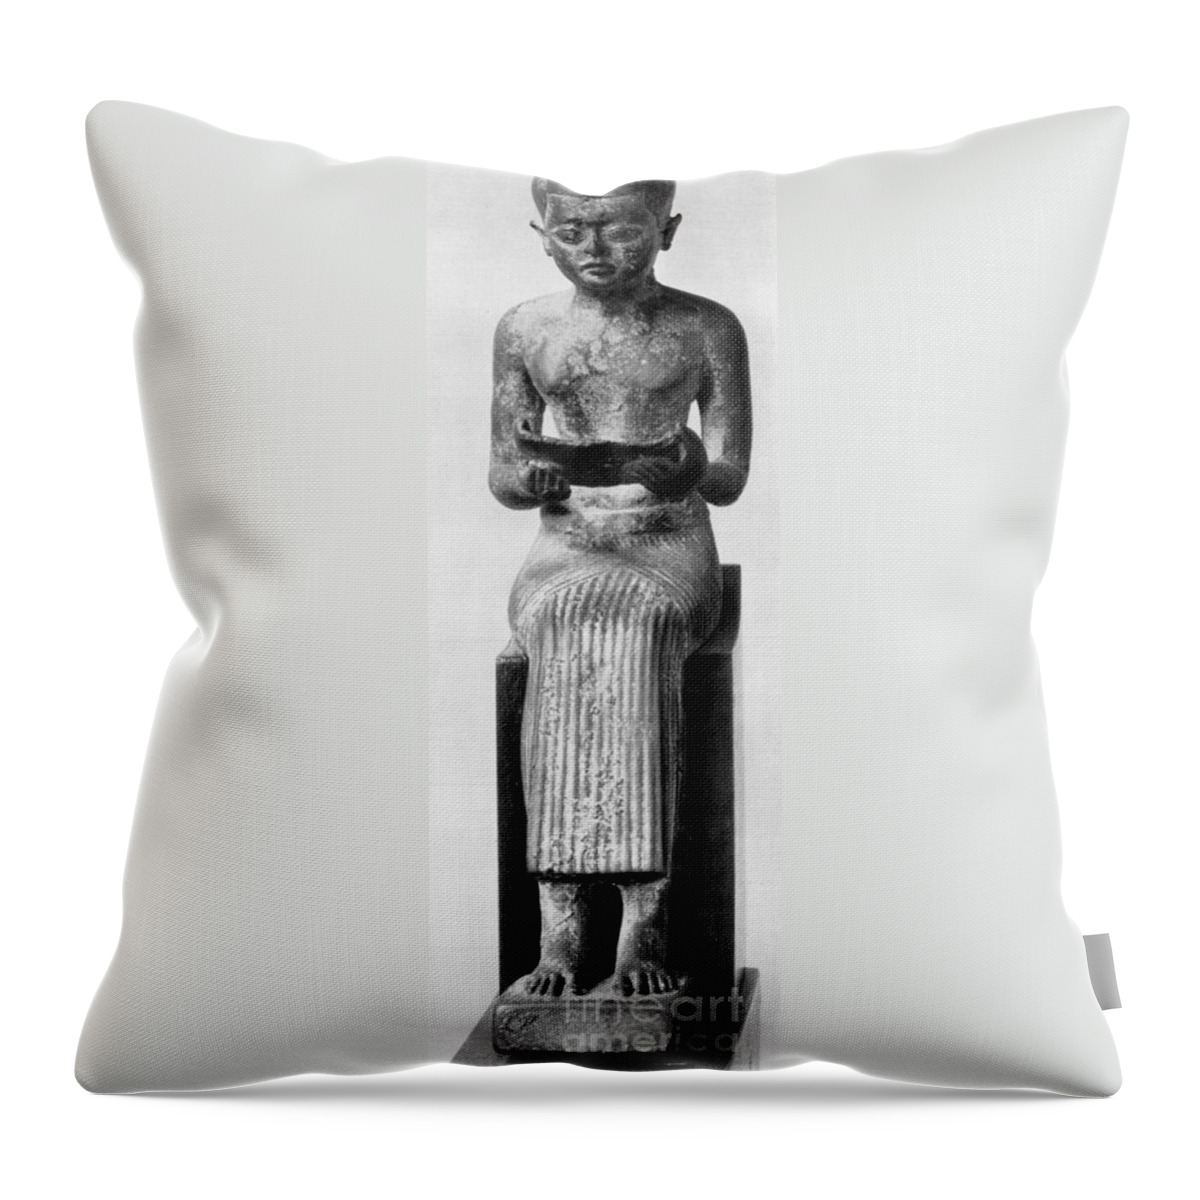 27th Century B.c Throw Pillow featuring the sculpture IMHOTEP, 27th CENTURY B.C by Granger